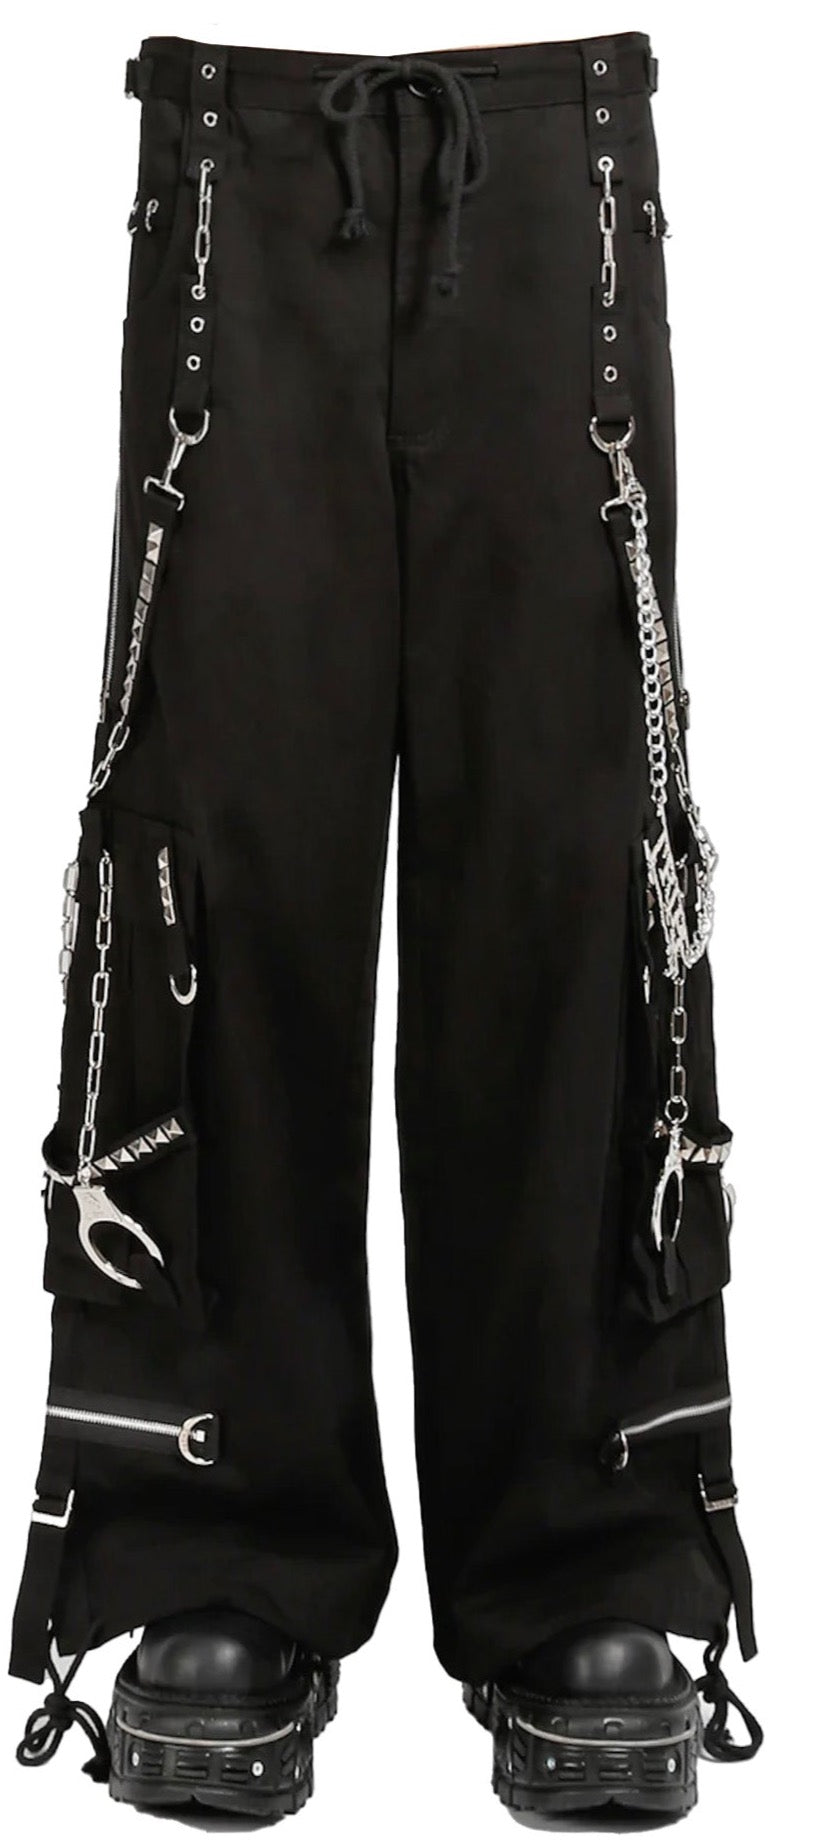 HANDCUFF PANT by TRIPP NYC